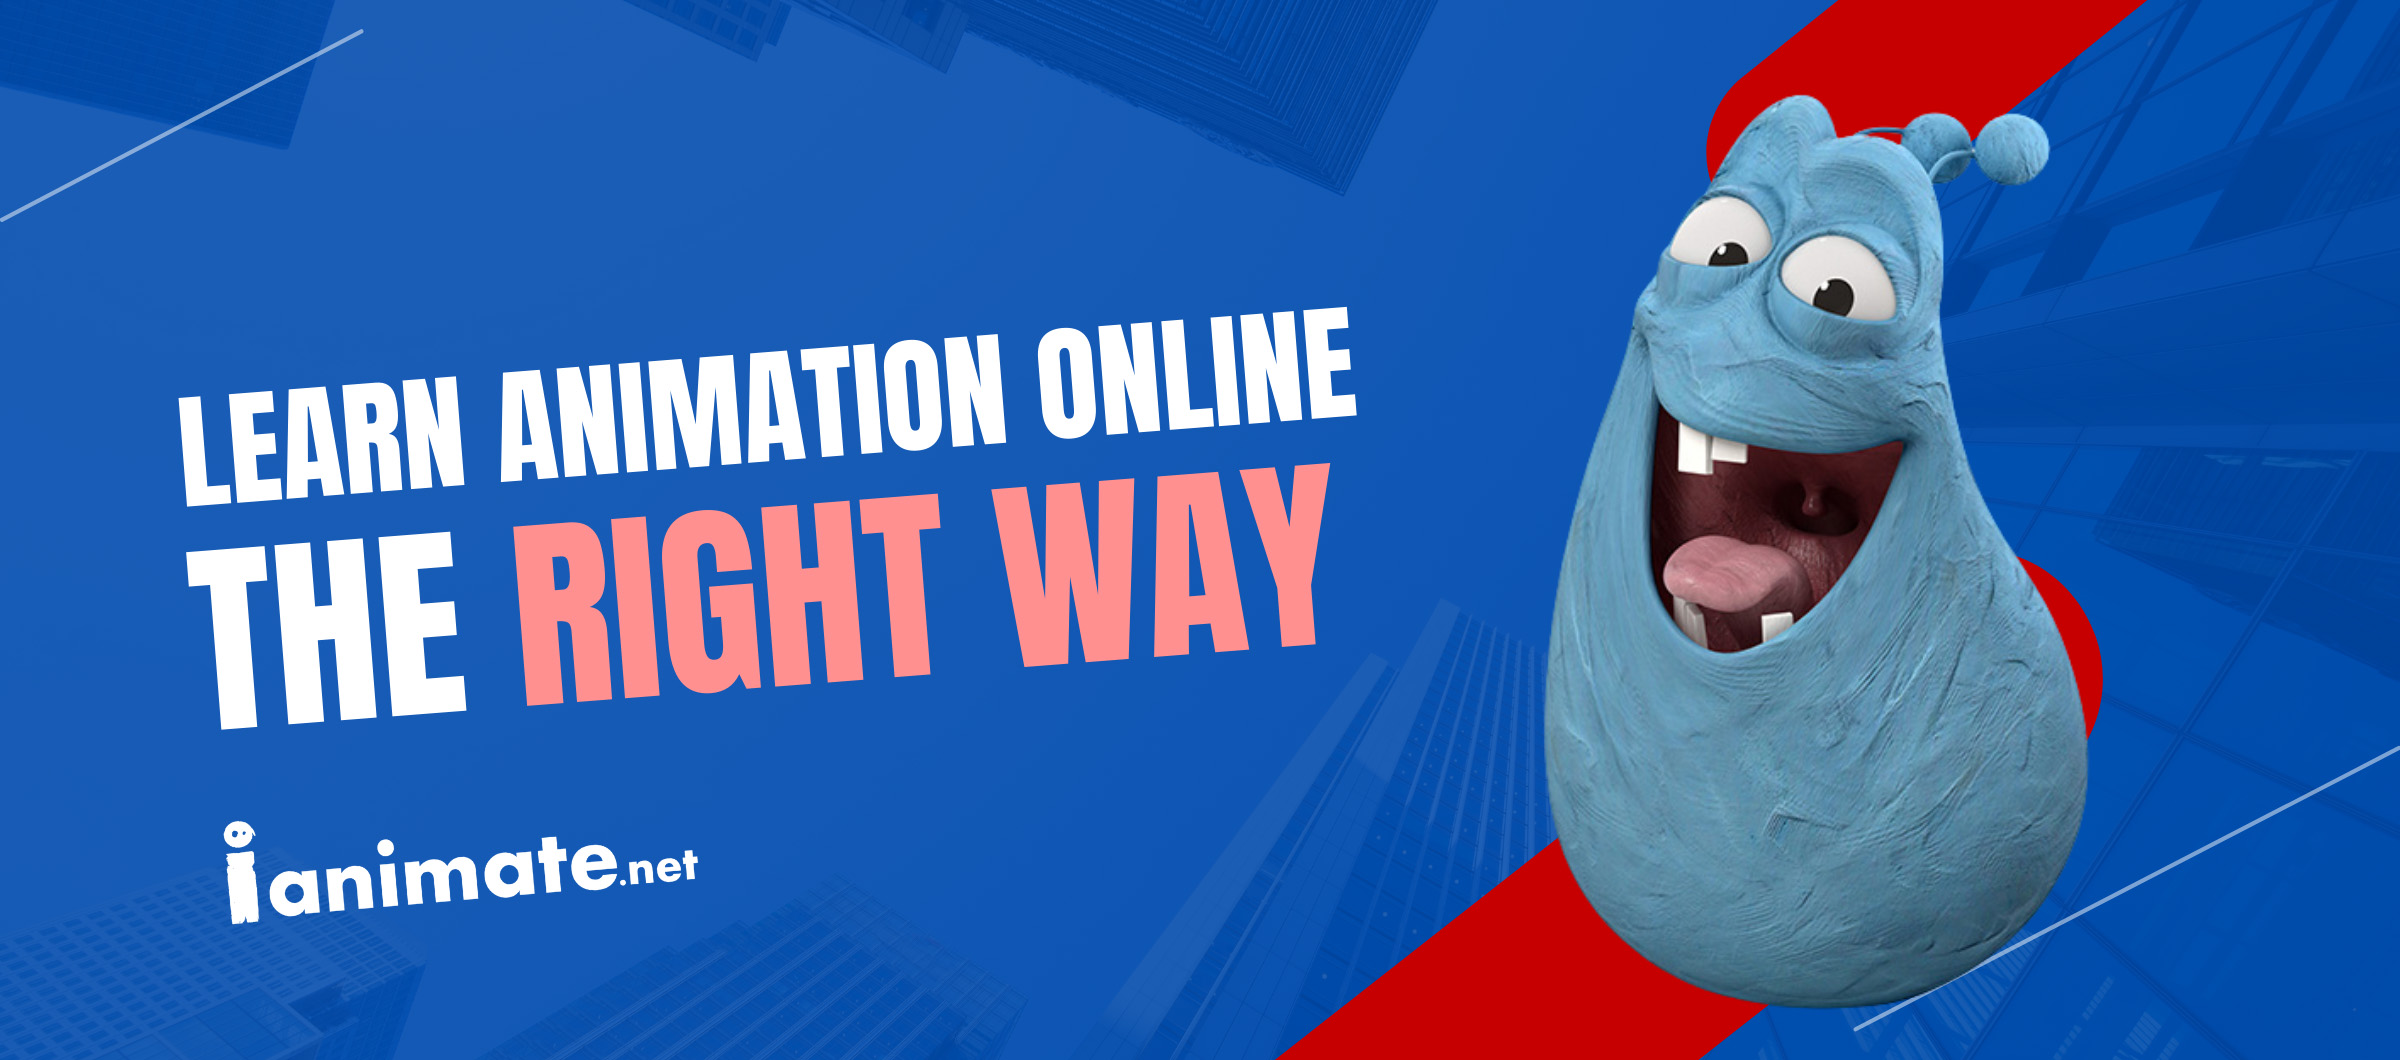 Learn Animation Online the Right Way